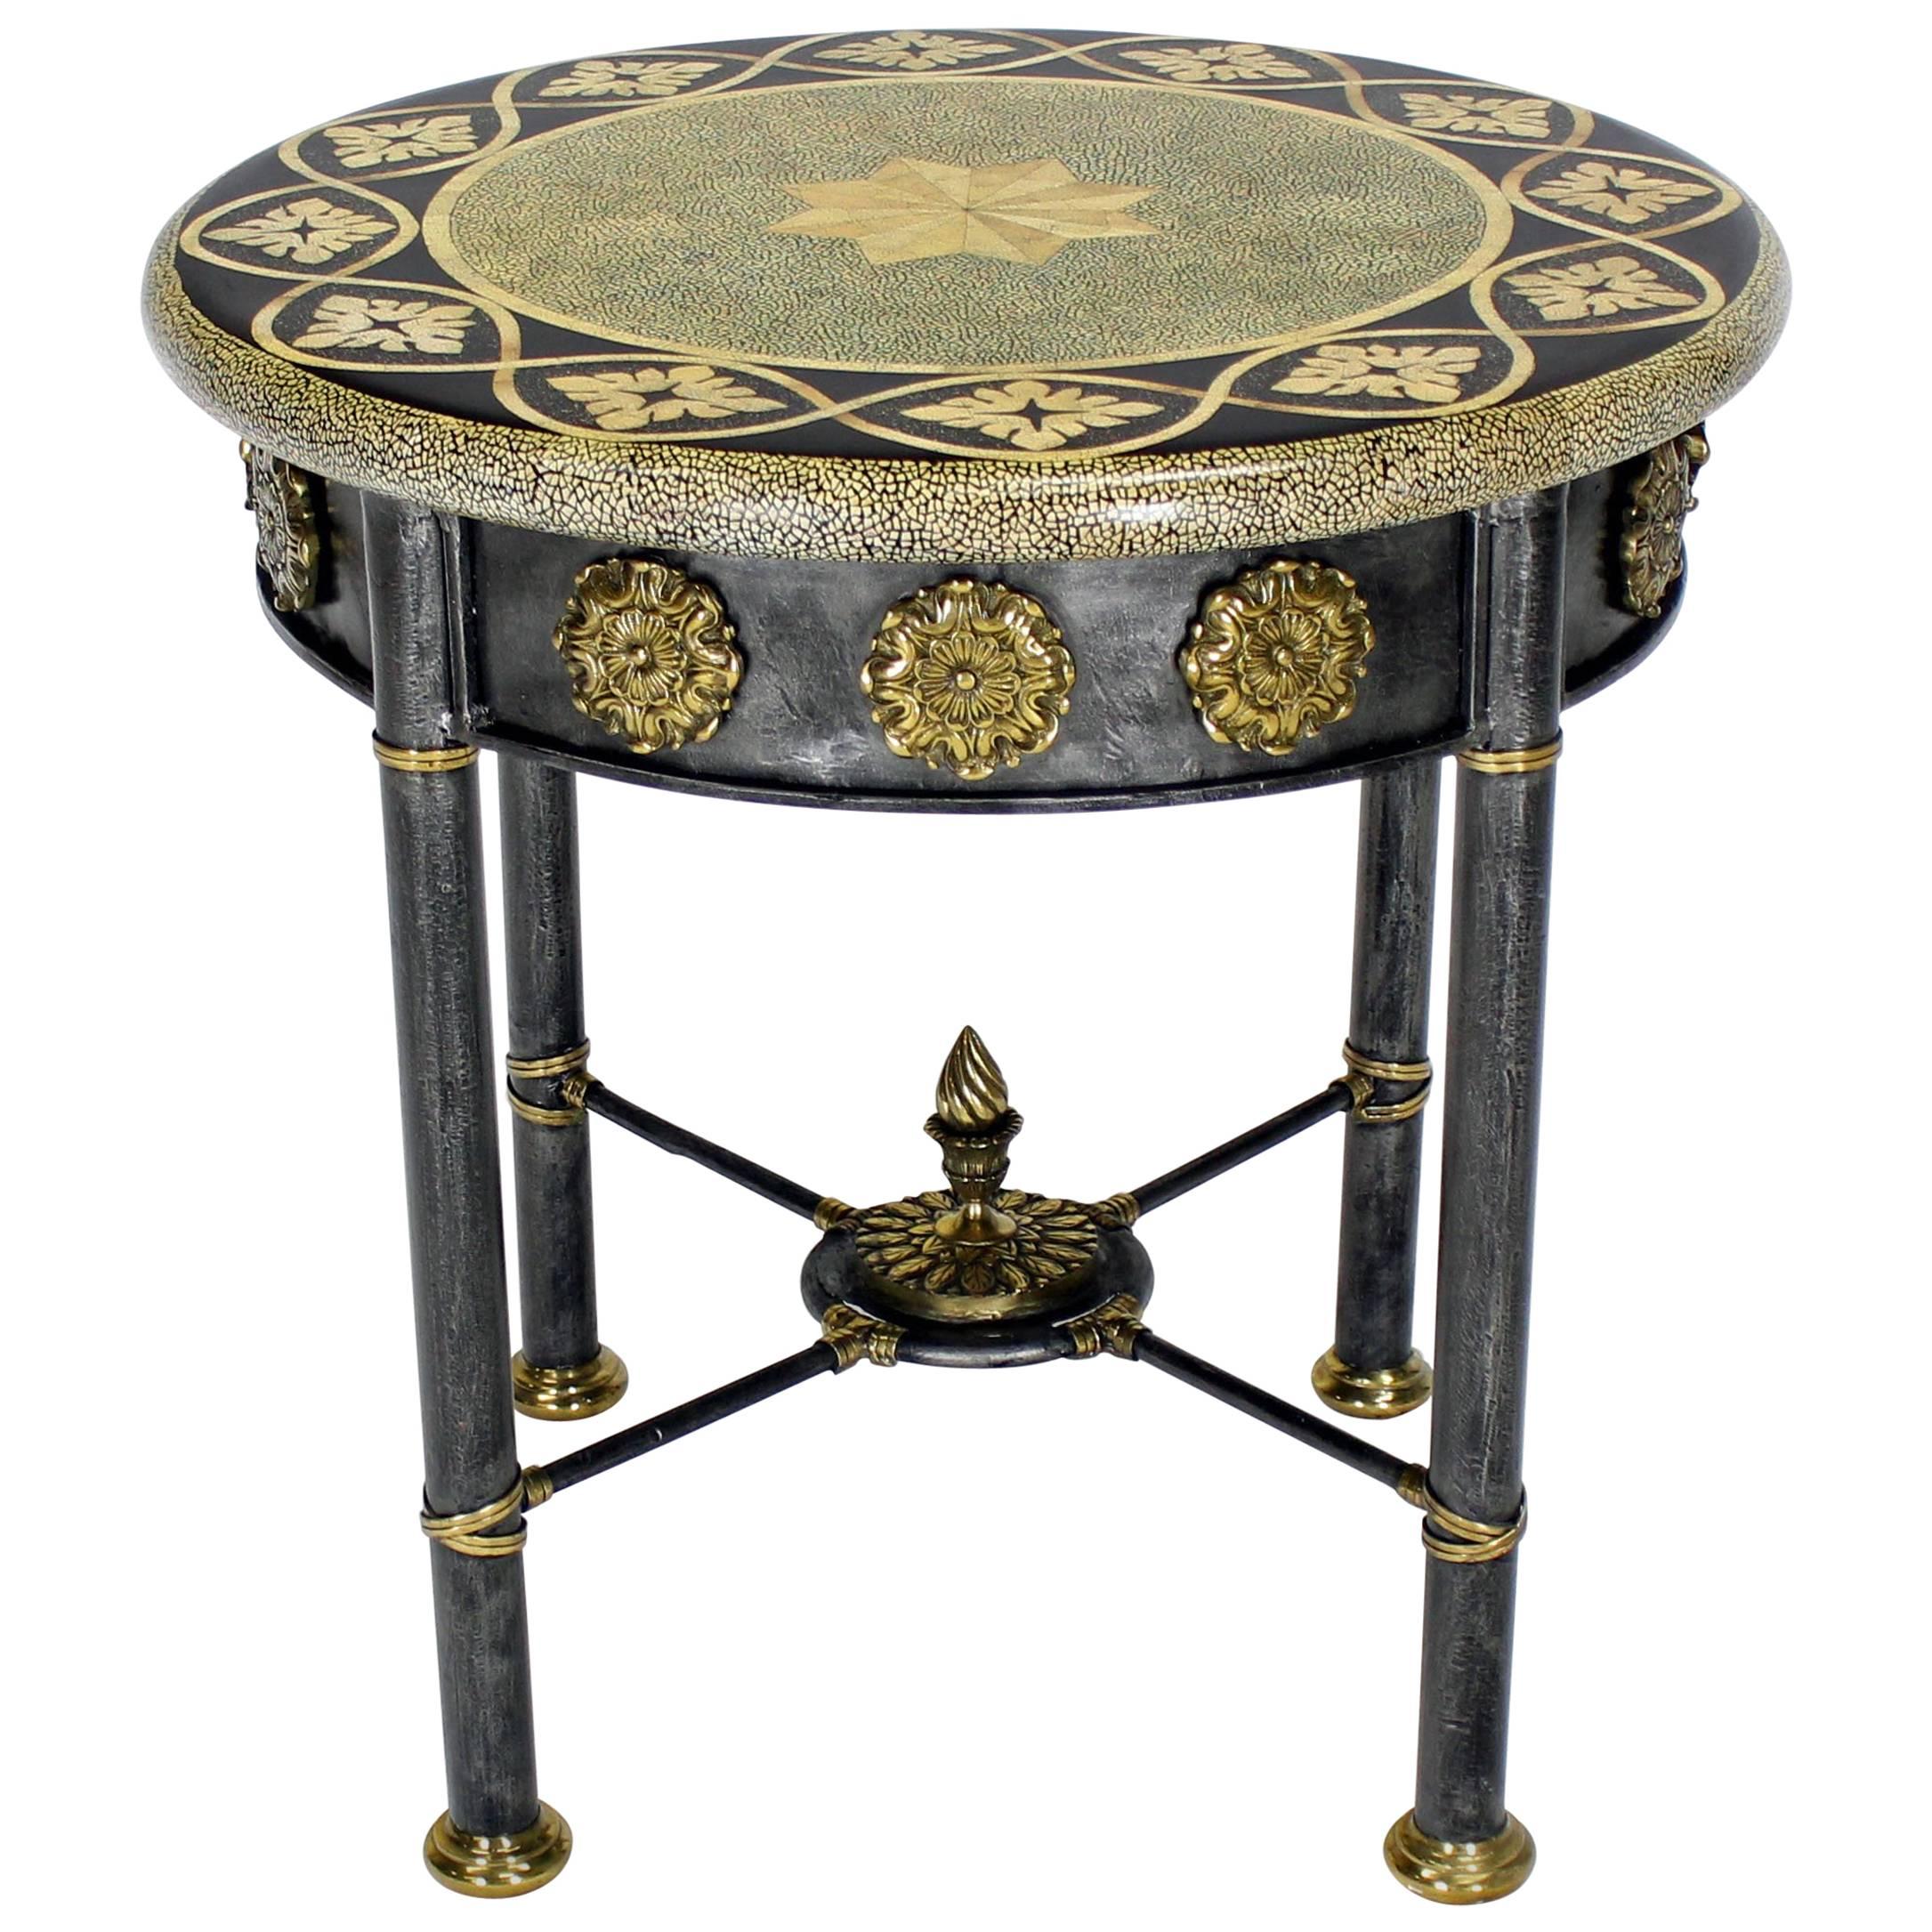 Round Faux Egg Shell Decorated Bronze Ormolu Decorated Round Gueridon Table For Sale